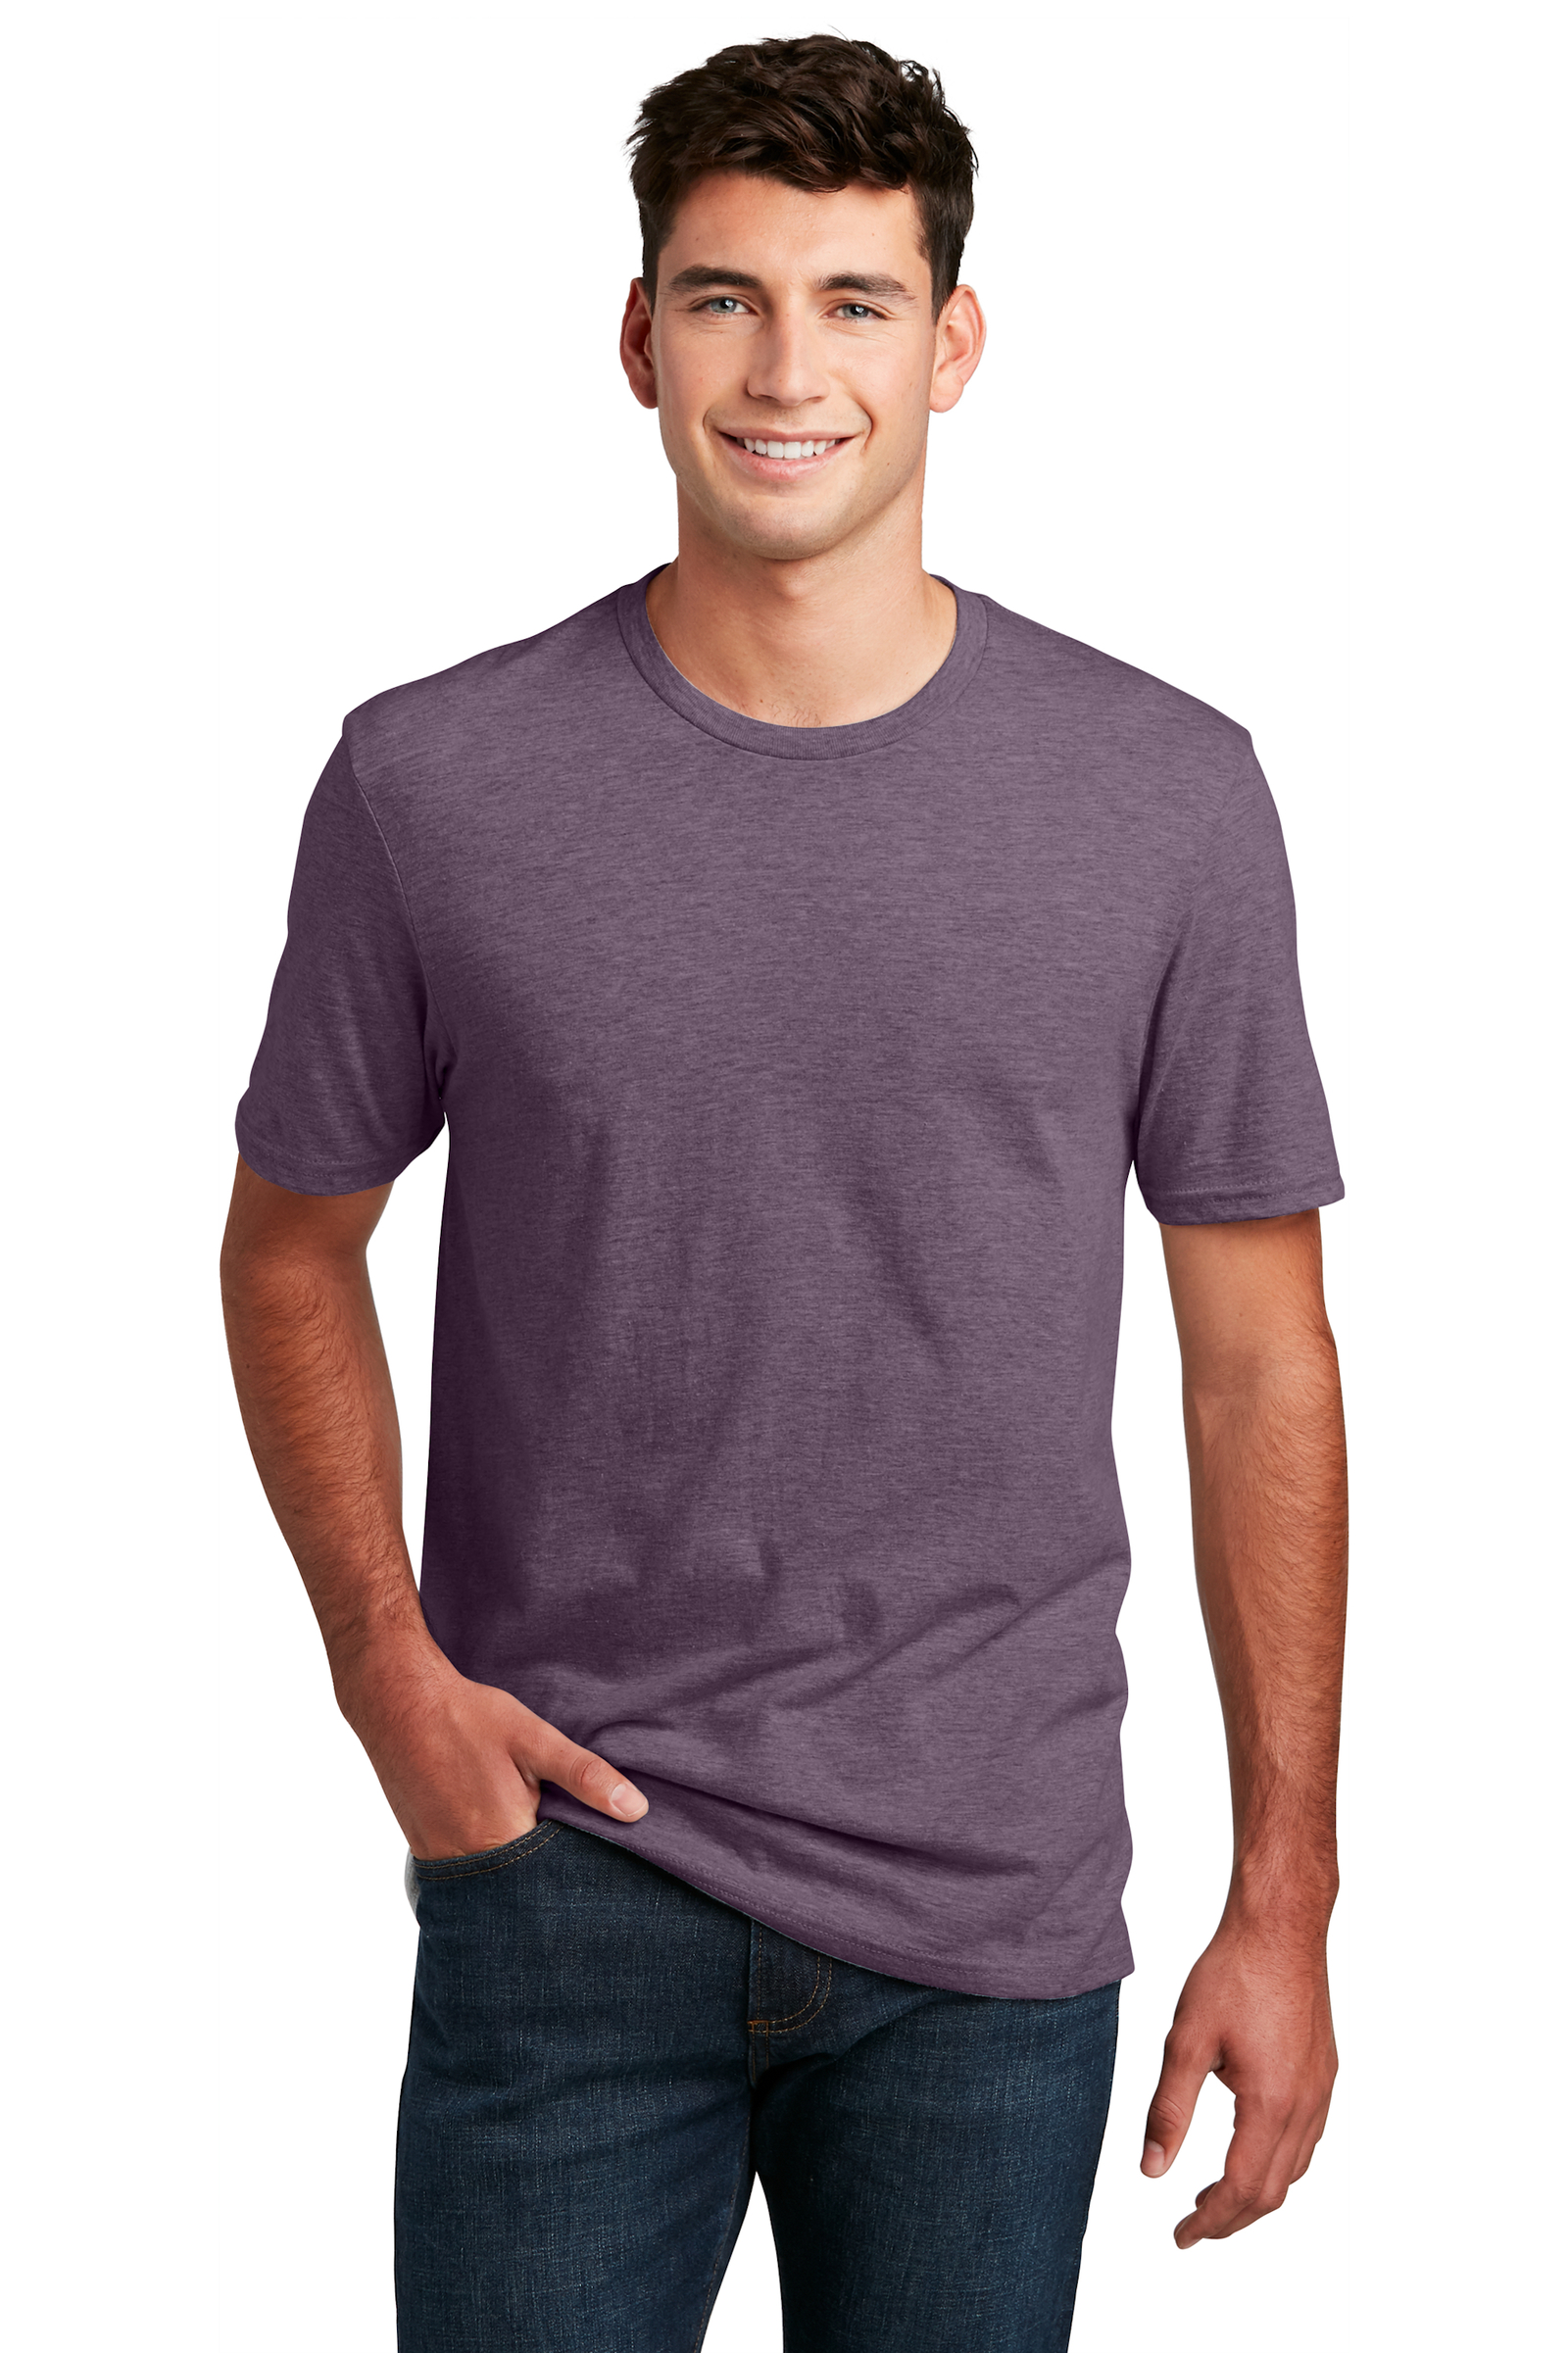 District Embroidered Men's Perfect Blend Tee